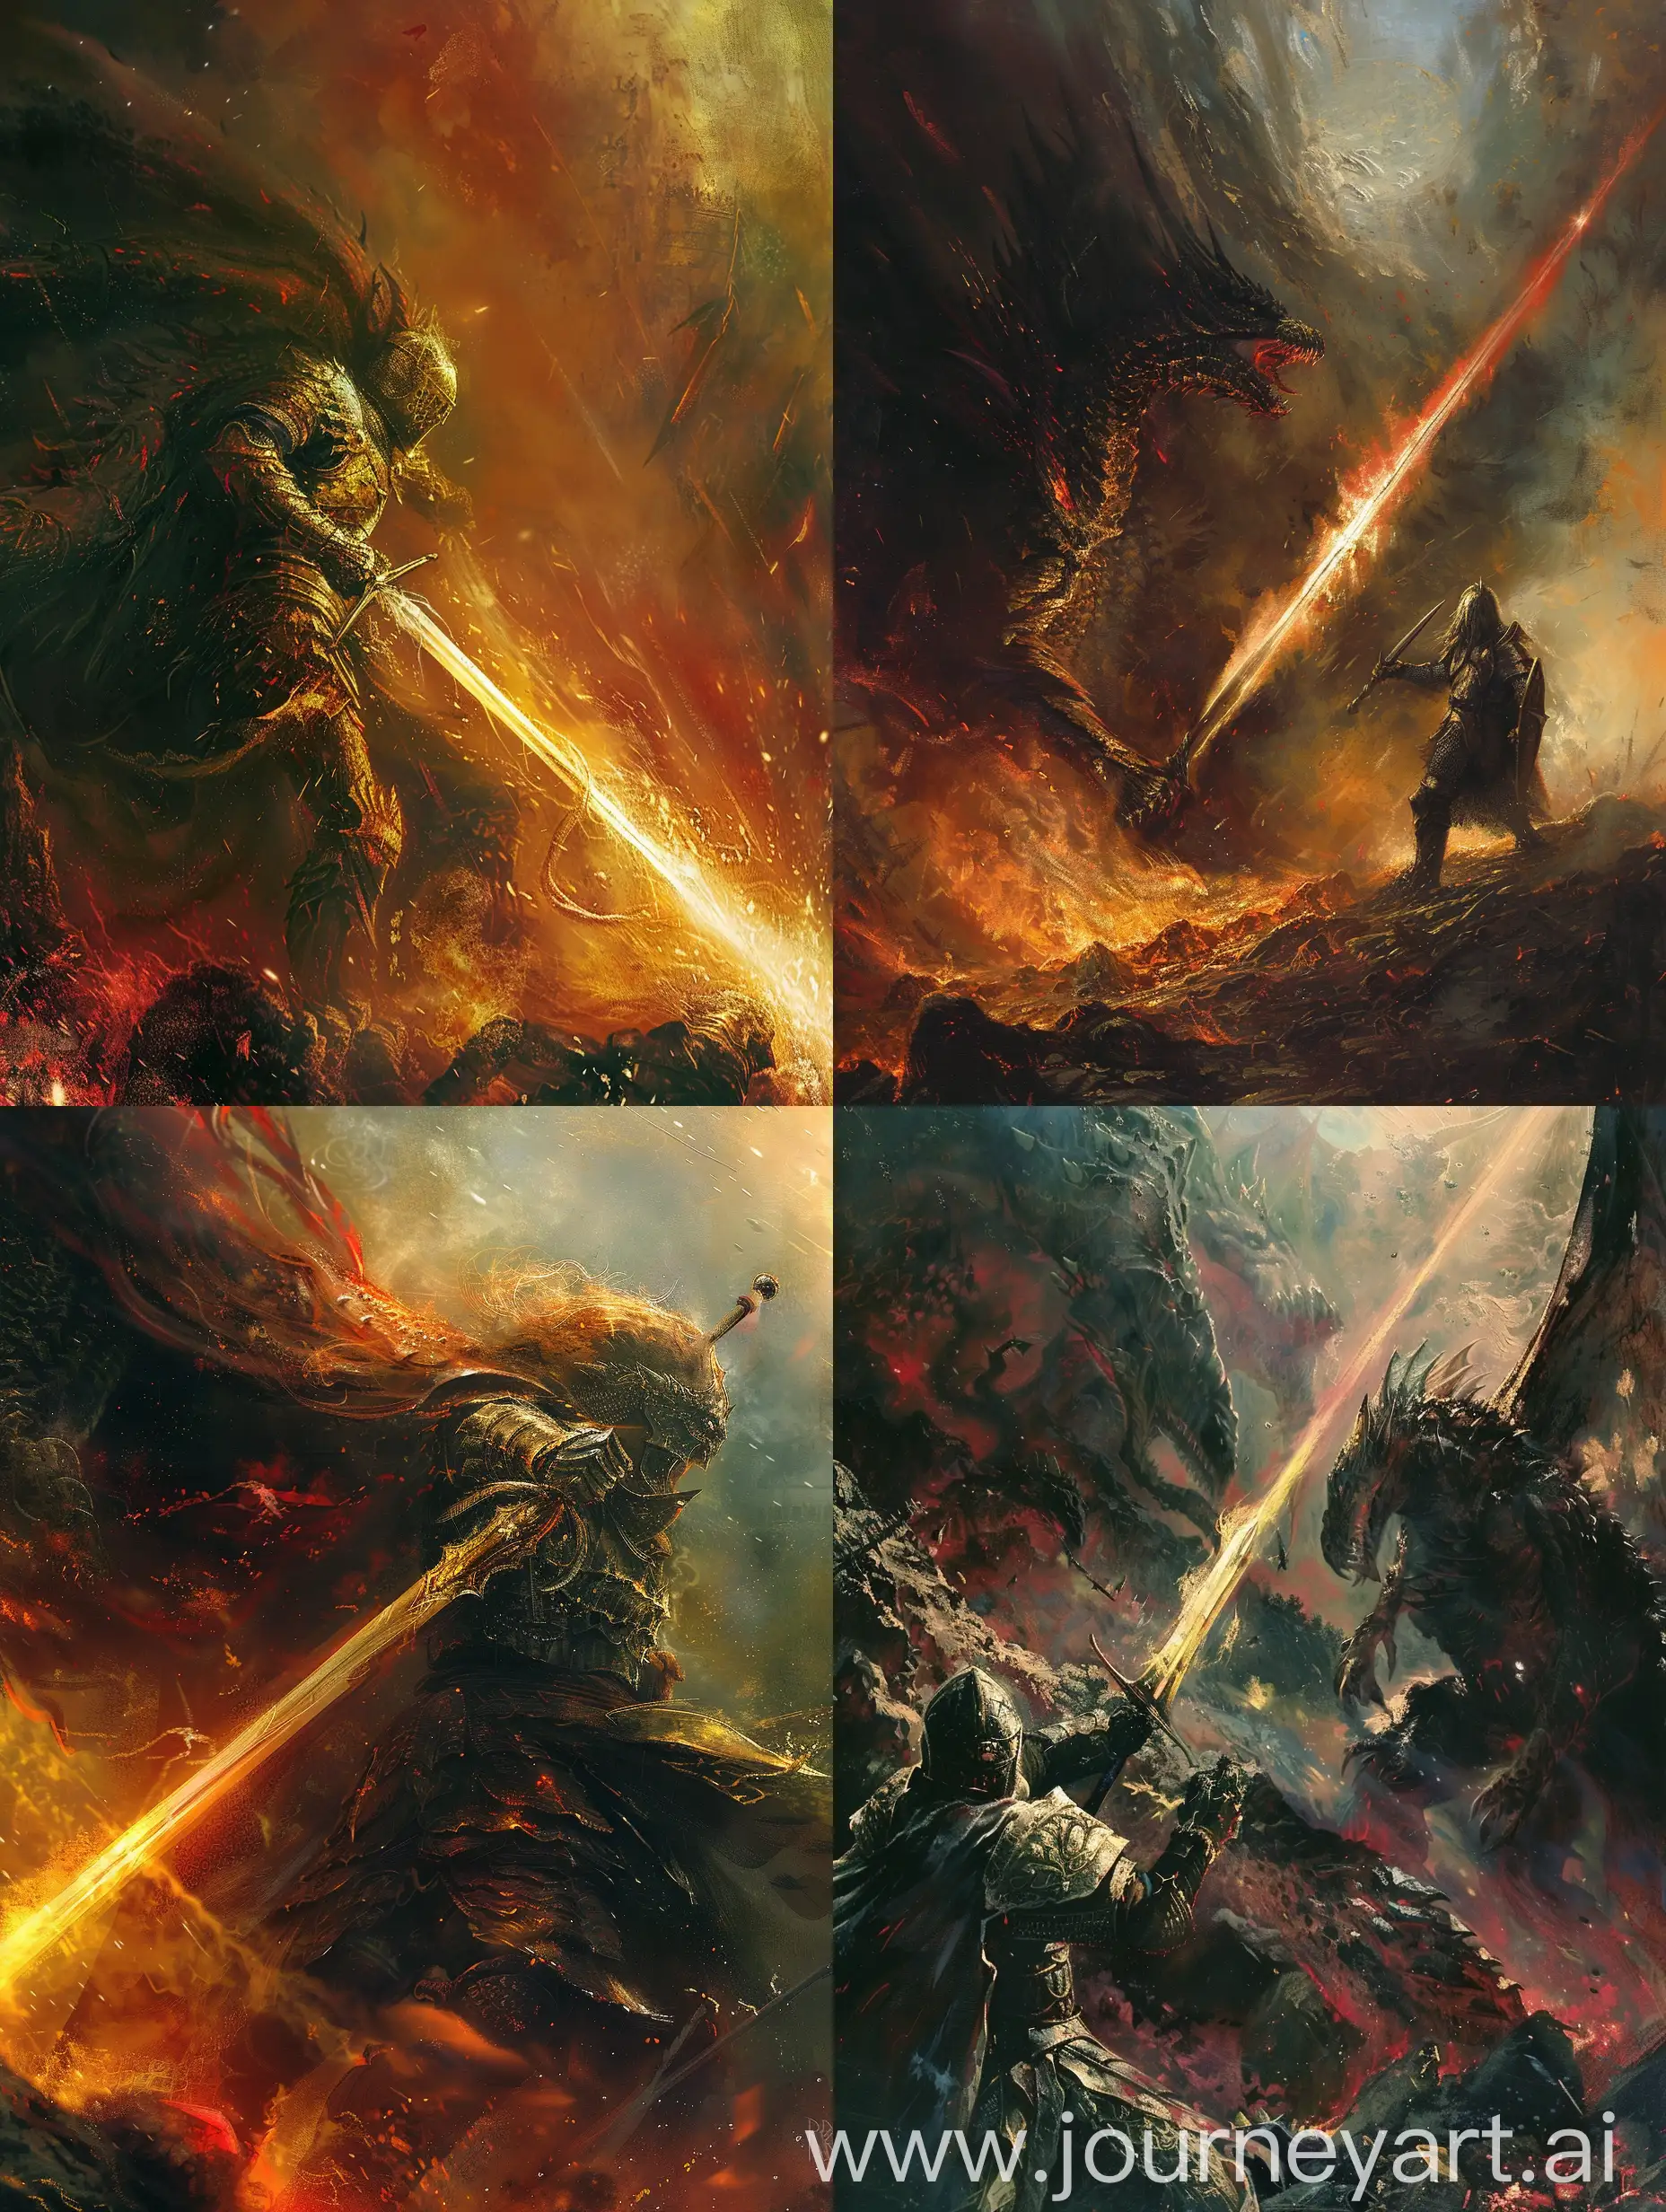 In the midst of battle, a courageous warrior bravely faces off against a fierce dragon with a sword ablaze with light. The warrior's armor gleams in the sunlight, showing signs of battle-worn experience, while the dragon's scales shimmer in hues of fiery red and obsidian black. This dramatic scene is depicted in a detailed and vibrant painting, capturing the intensity and bravery of the combatants. The high level of artistry and intricate detail in this image truly brings the epic showdown to life, making it a visually stunning masterpiece. Distant view. Far view.